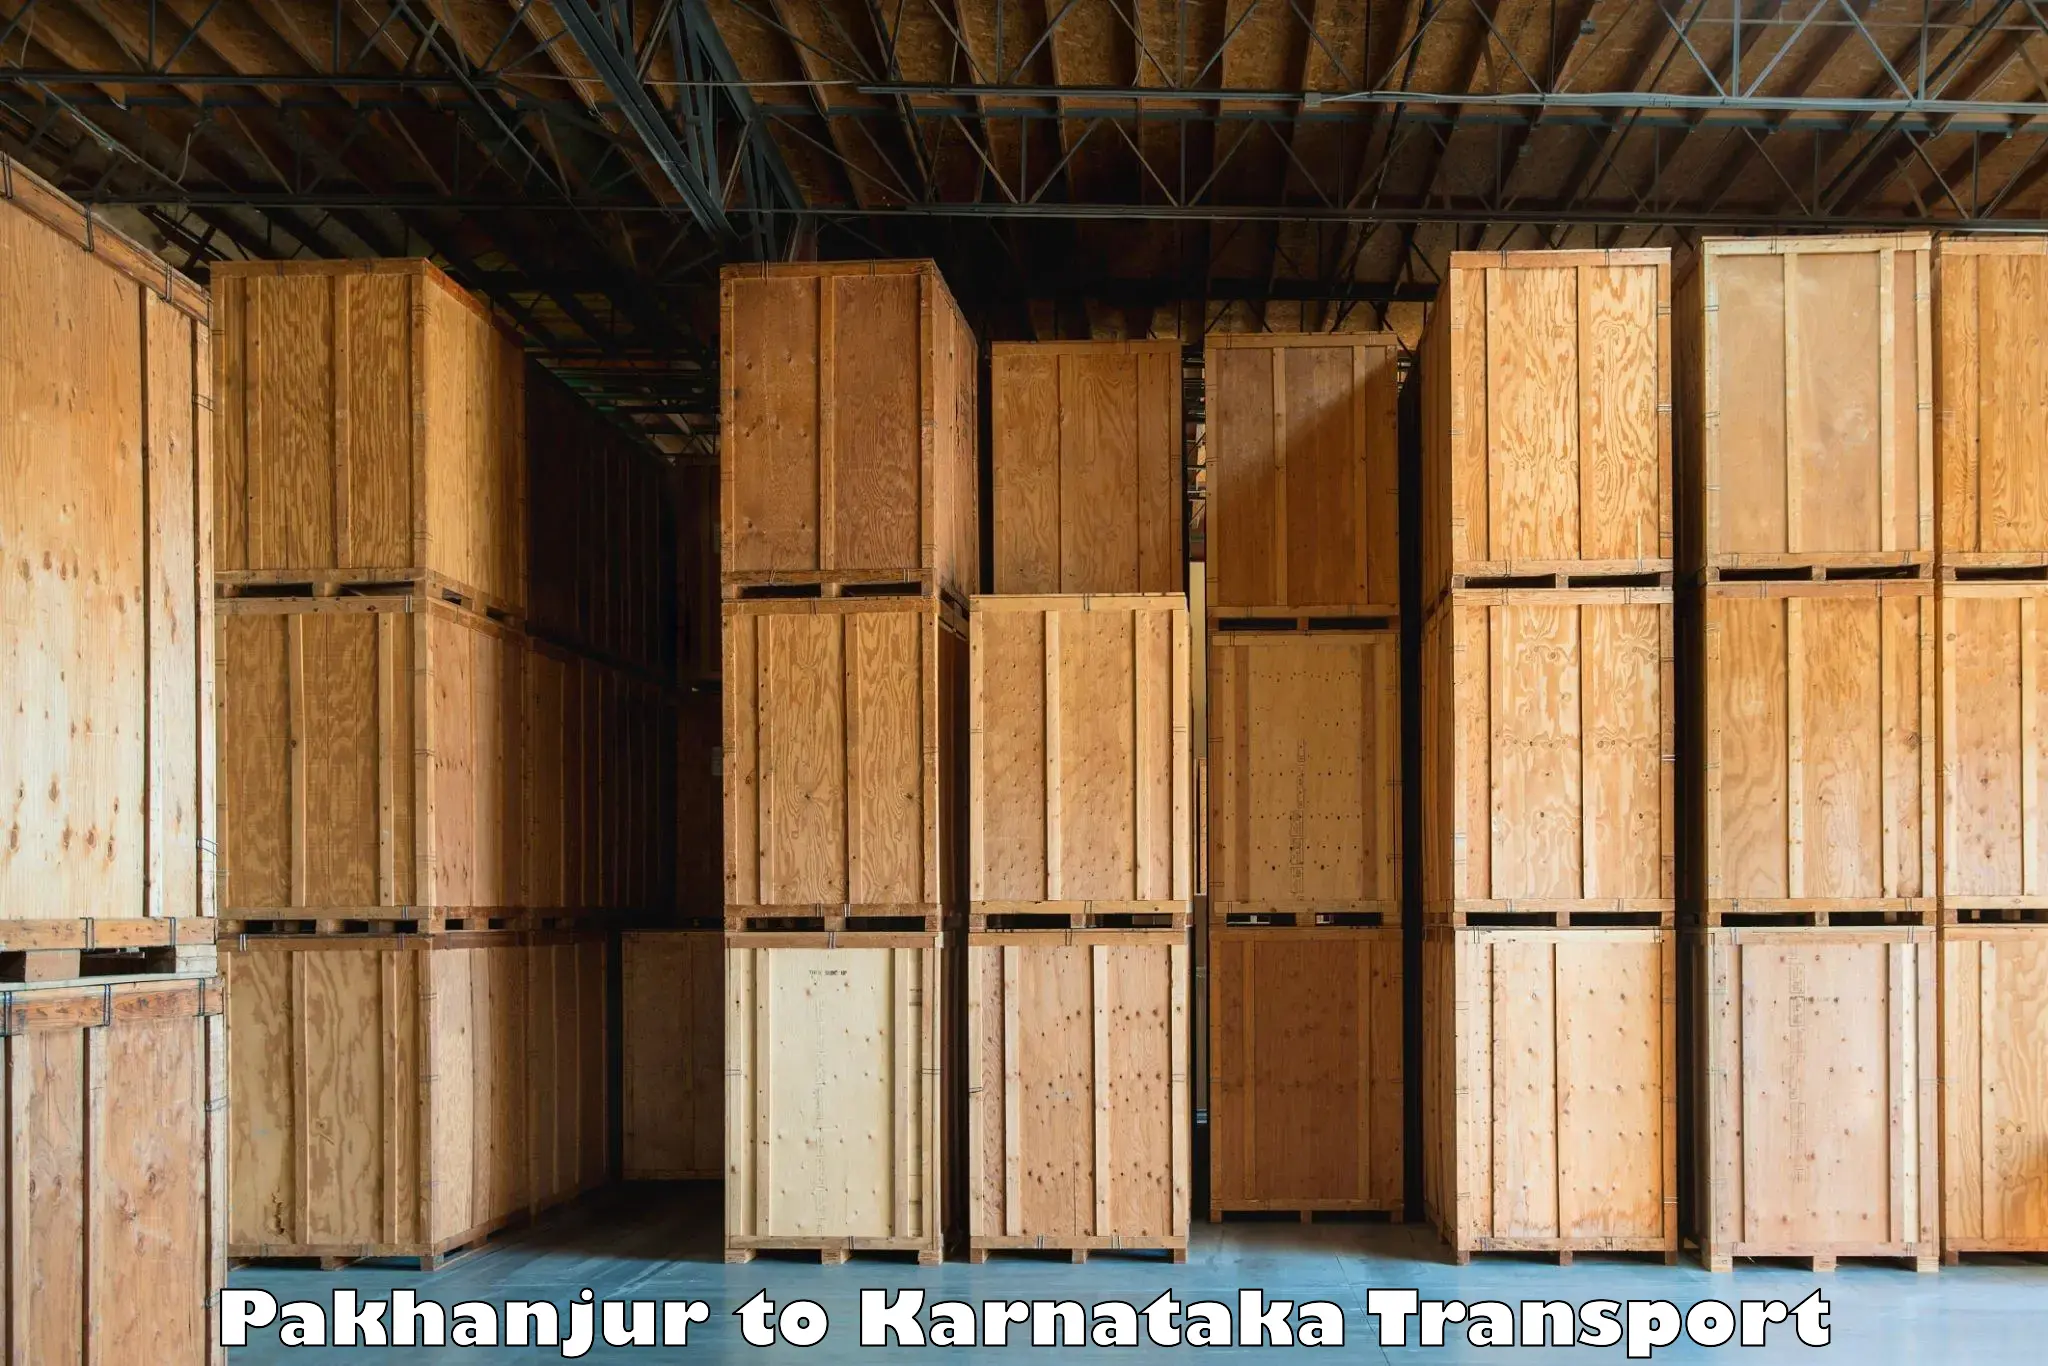 Truck transport companies in India Pakhanjur to Mysore